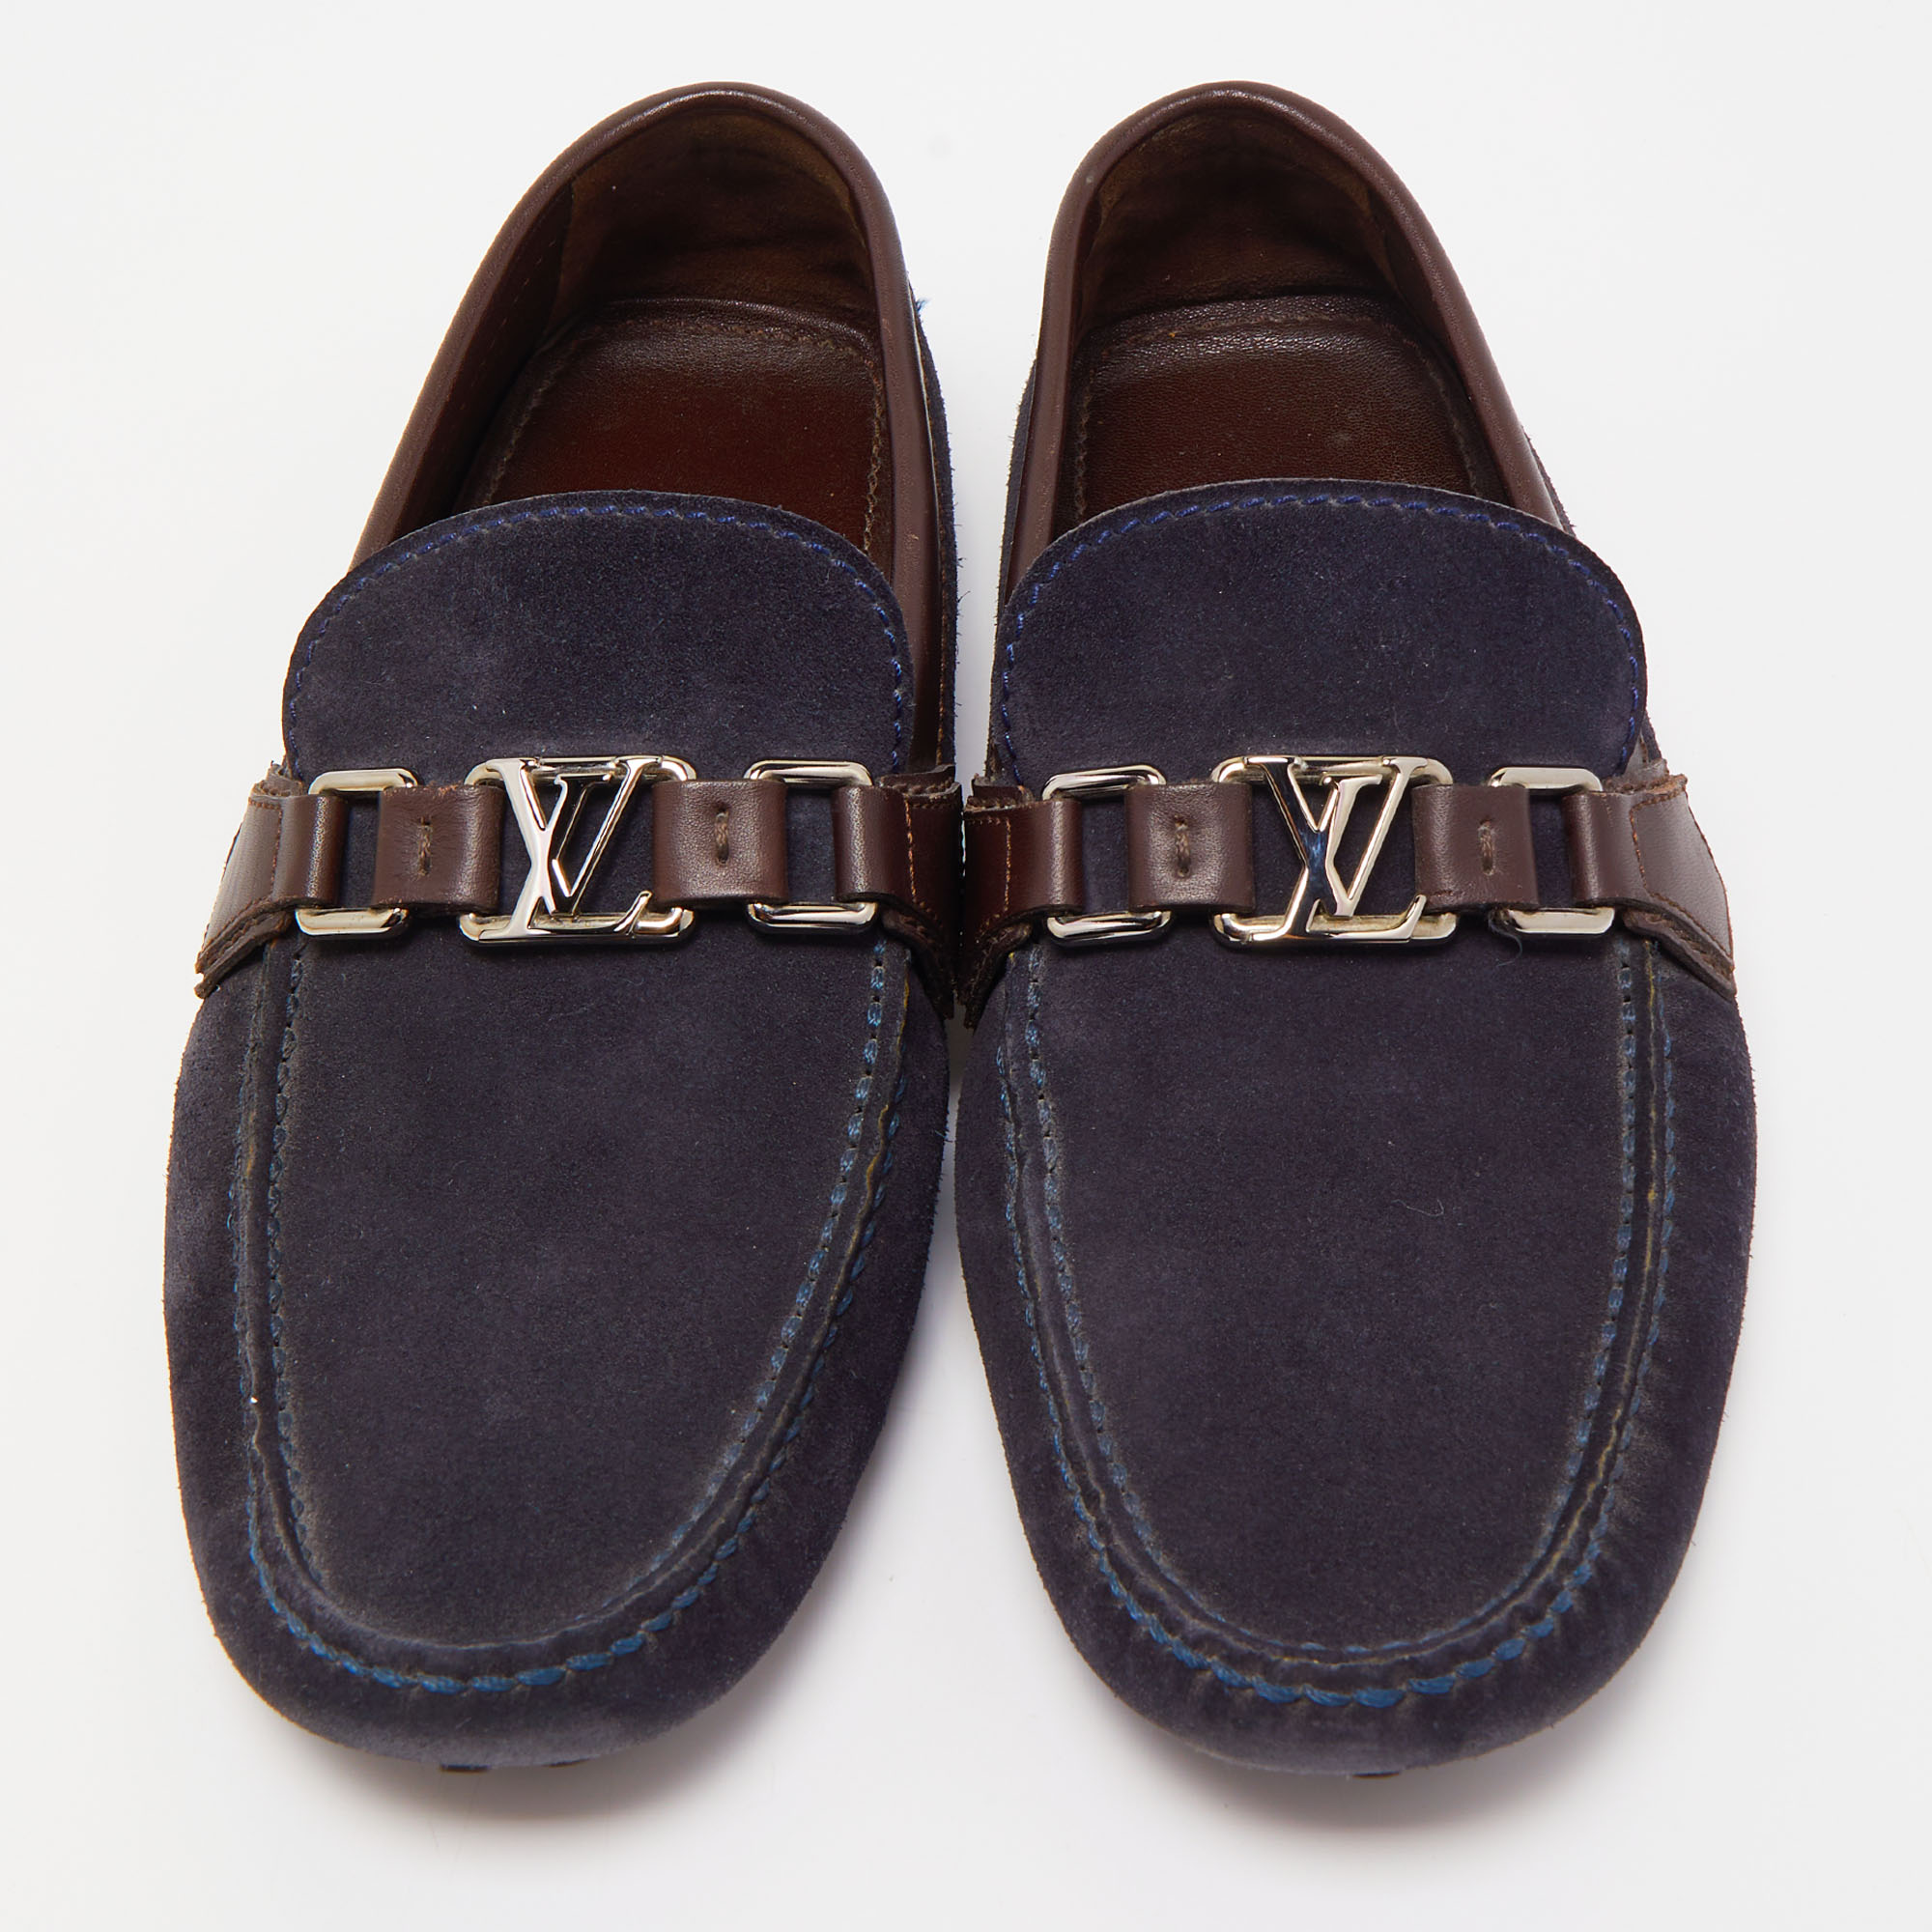 Louis Vuitton Navy Blue/Brown Suede And Leather Hockenheim Slip On Loafers Size 40.5